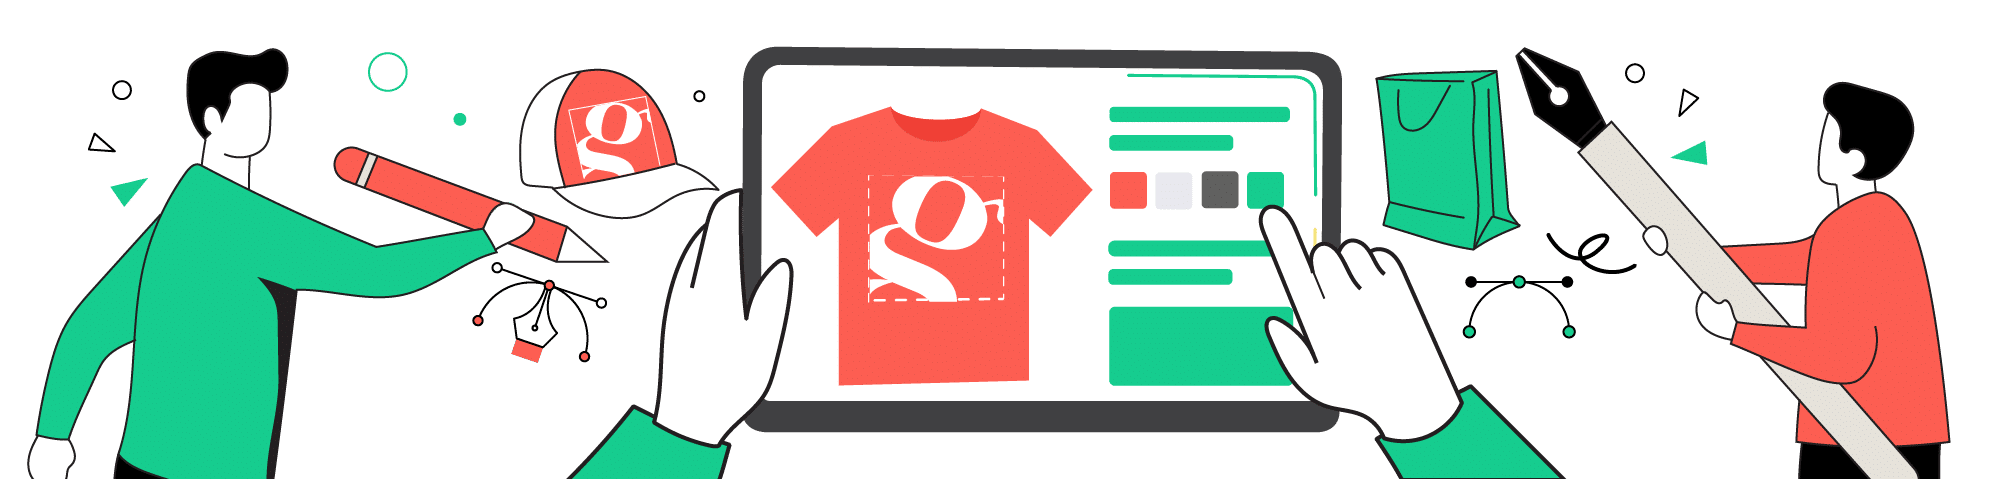 How To Get Merchandise Illustrations For Your Brand